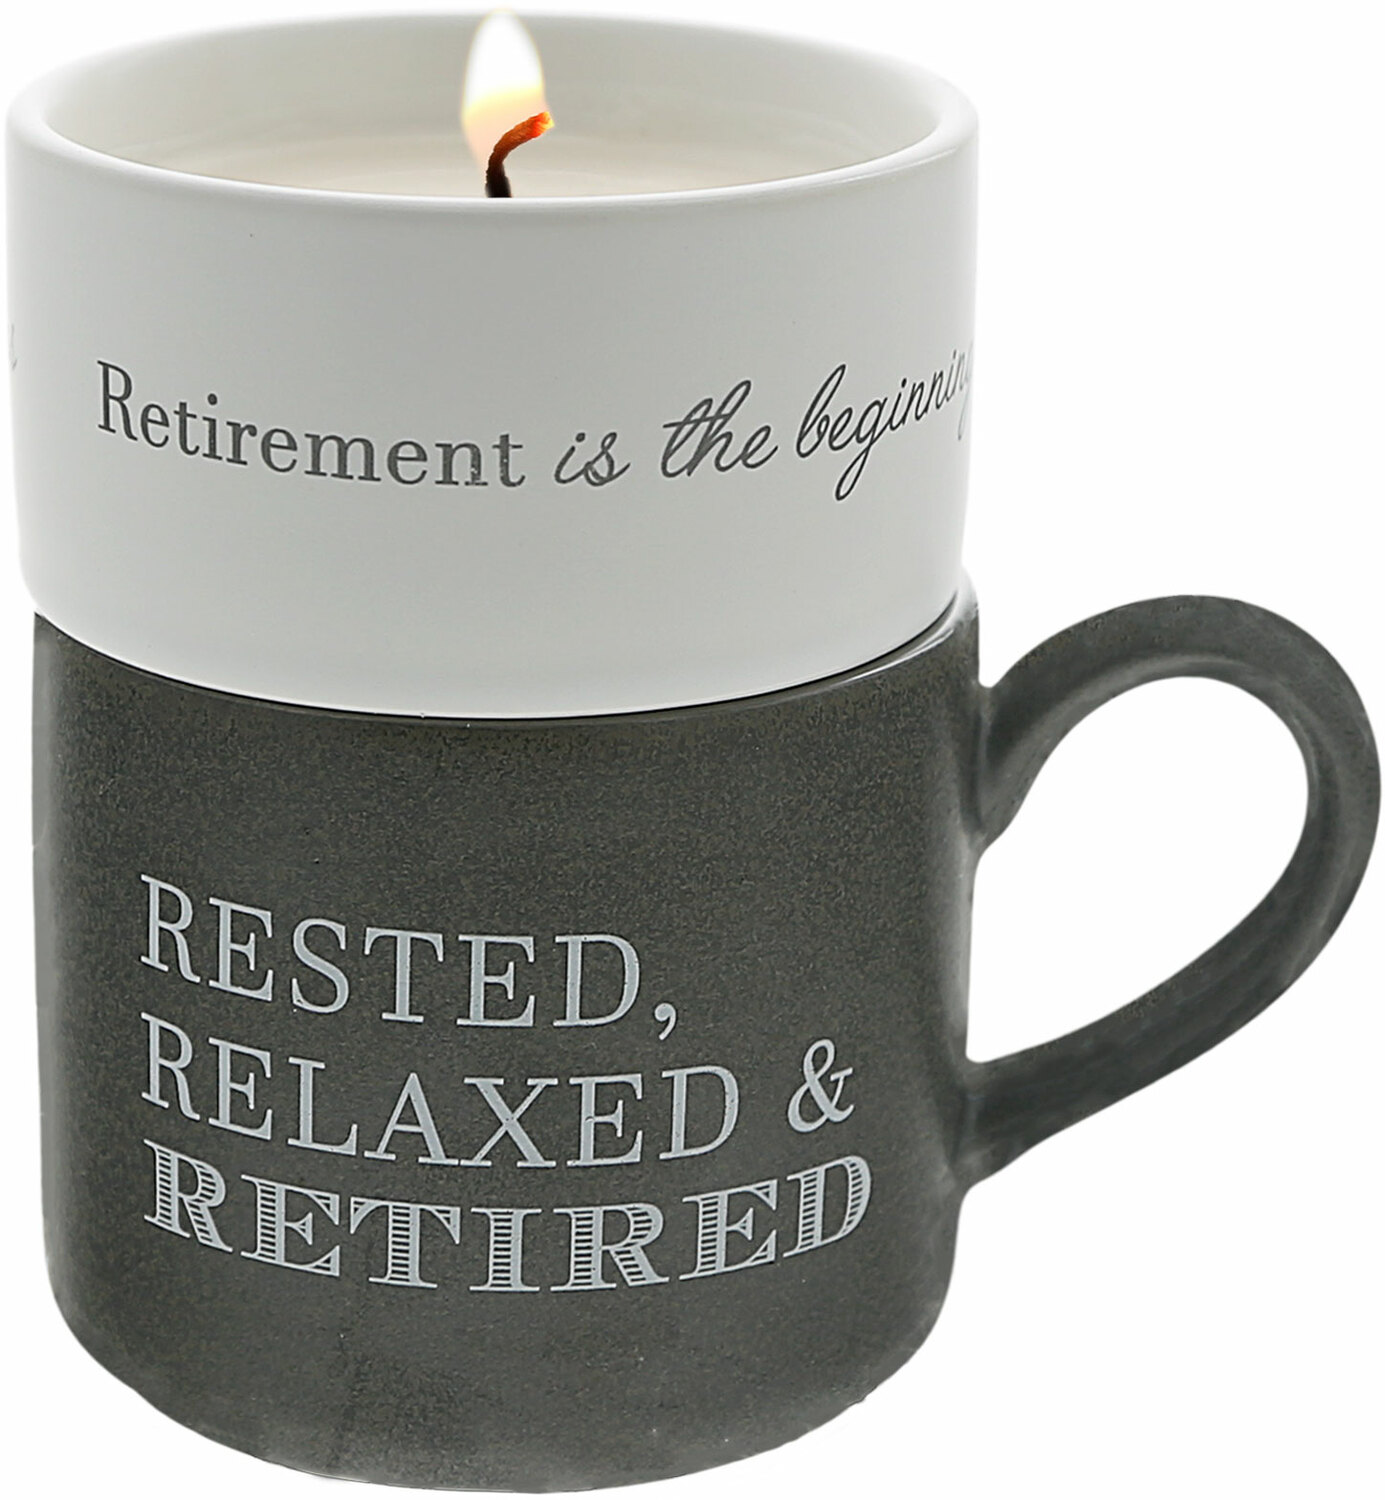 Retirement by Filled with Warmth - Retirement - Stacking Mug and Candle Set
100% Soy Wax Scent: Tranquility